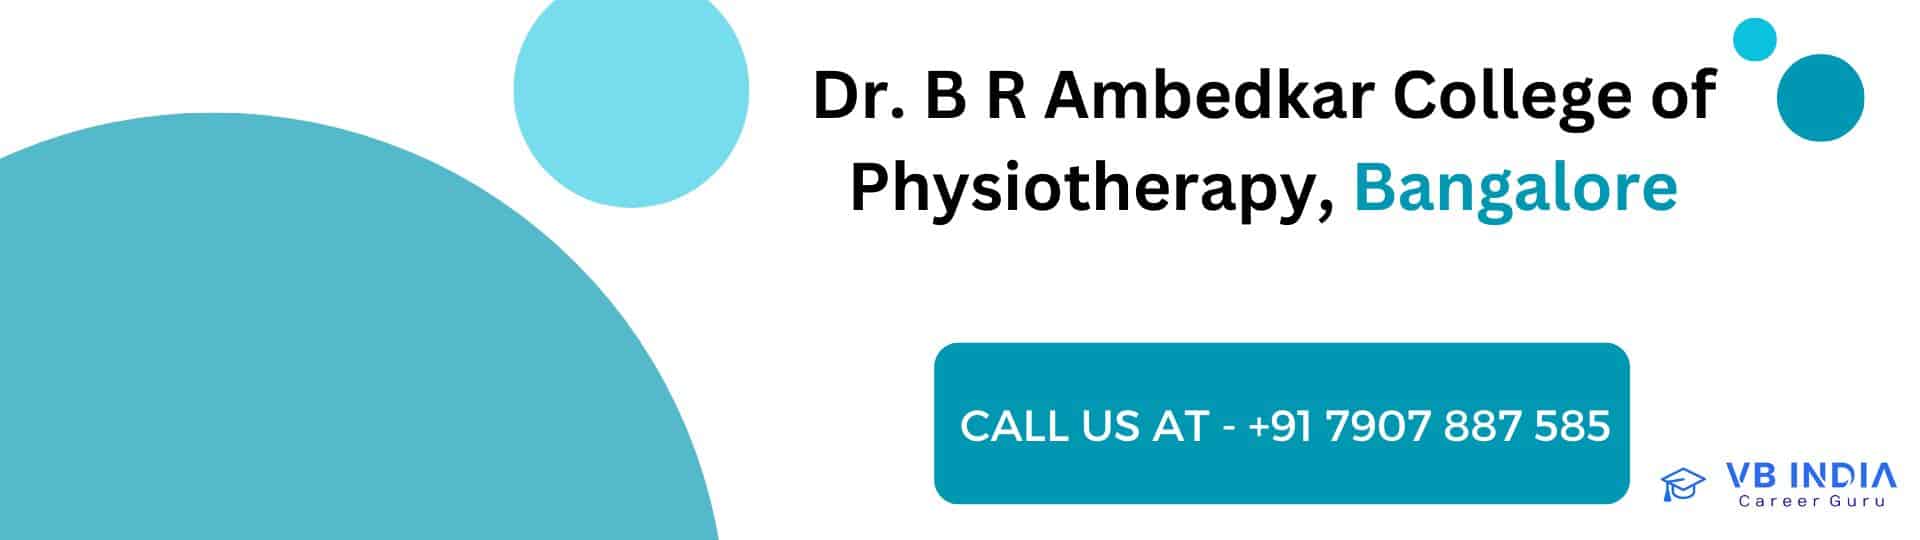 Dr. B R Ambedkar College of Physiotherapy Bangalore